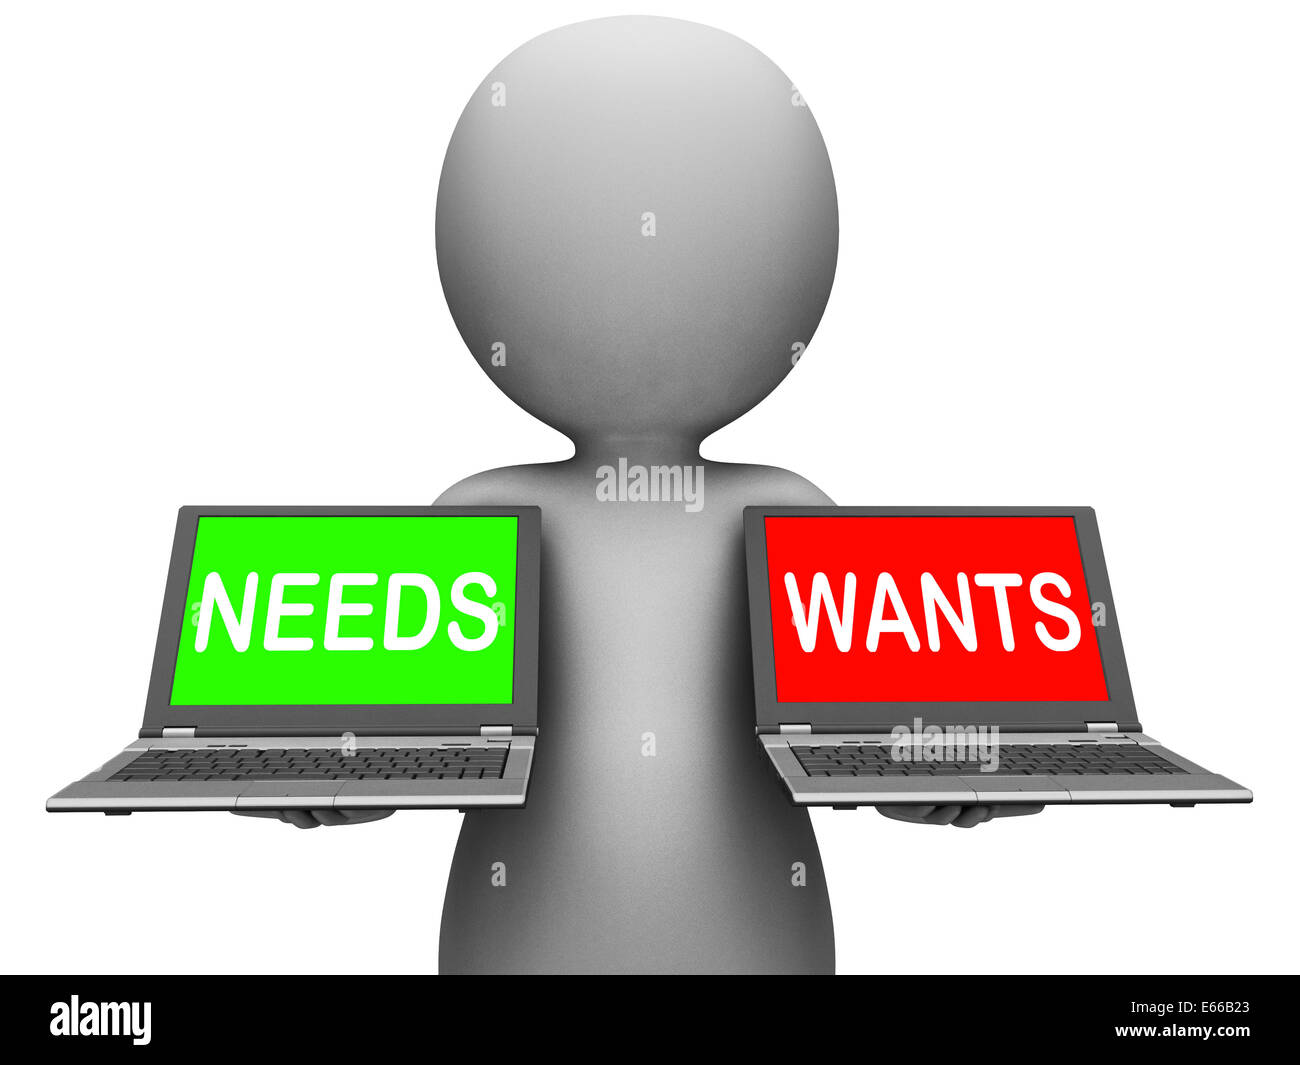 Wants Needs Laptops Showing Materialism Want Need Stock Photo